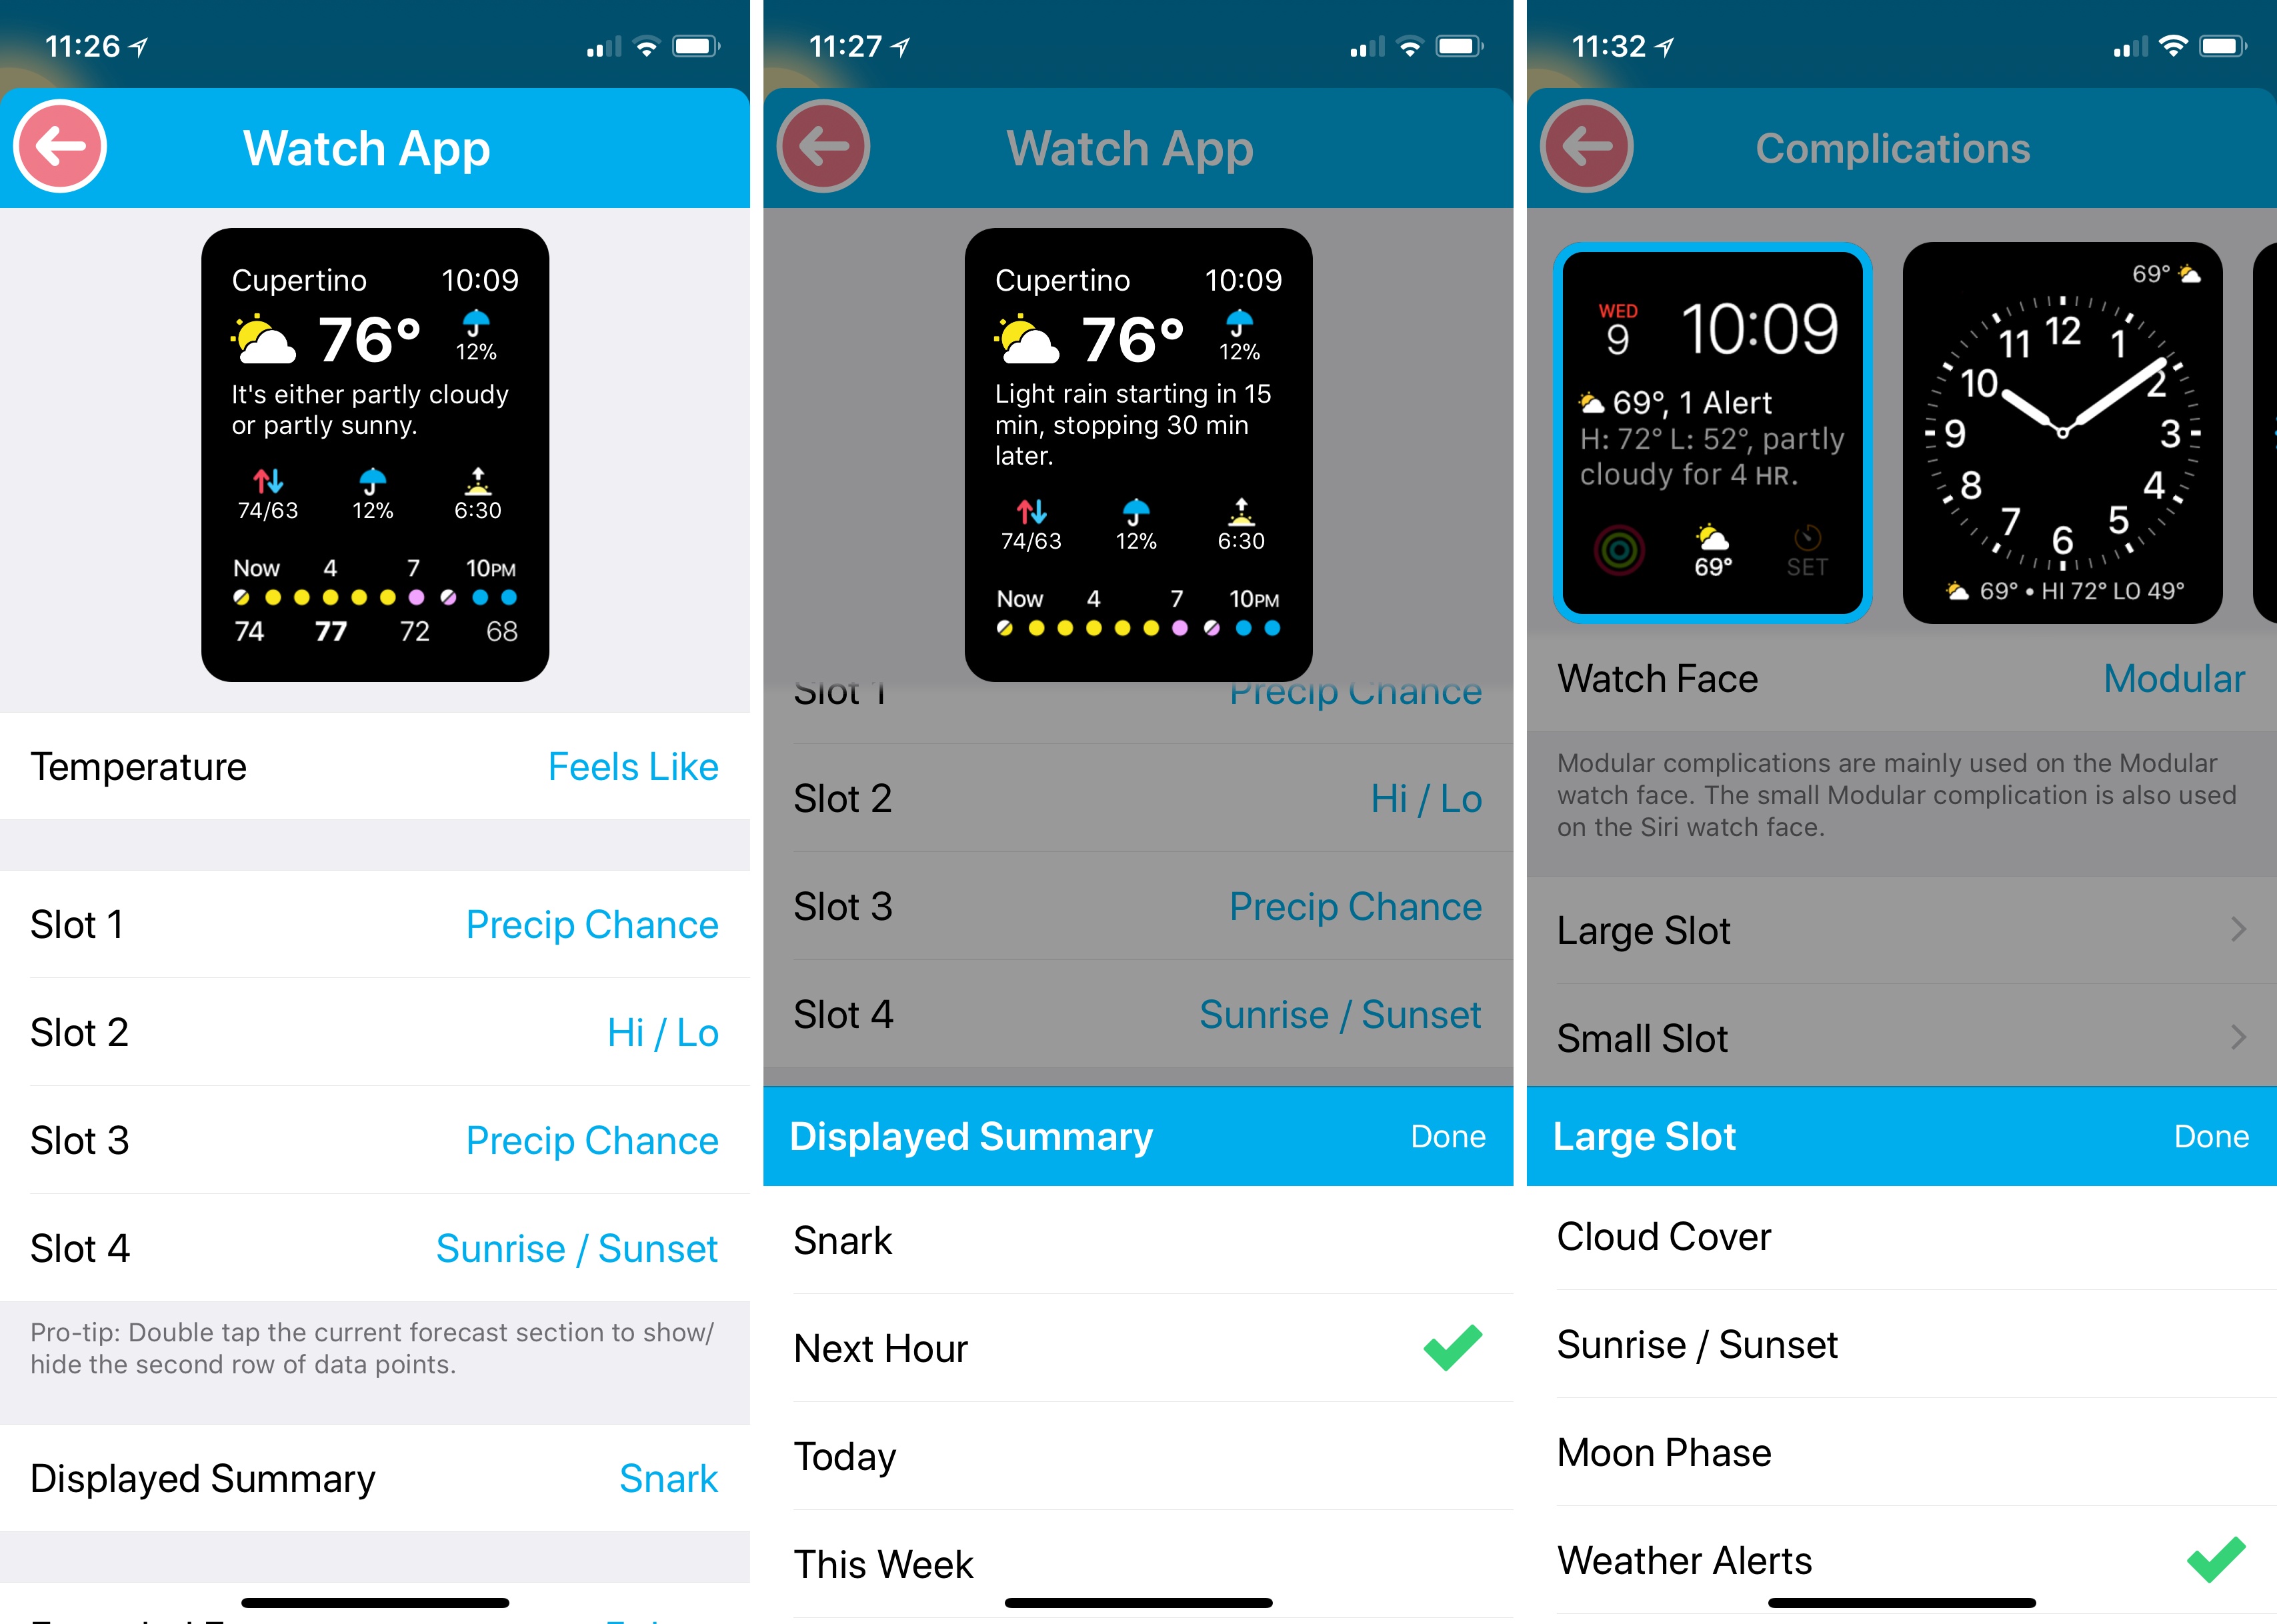 Customization options for CARROT Weather's Watch app and complications.